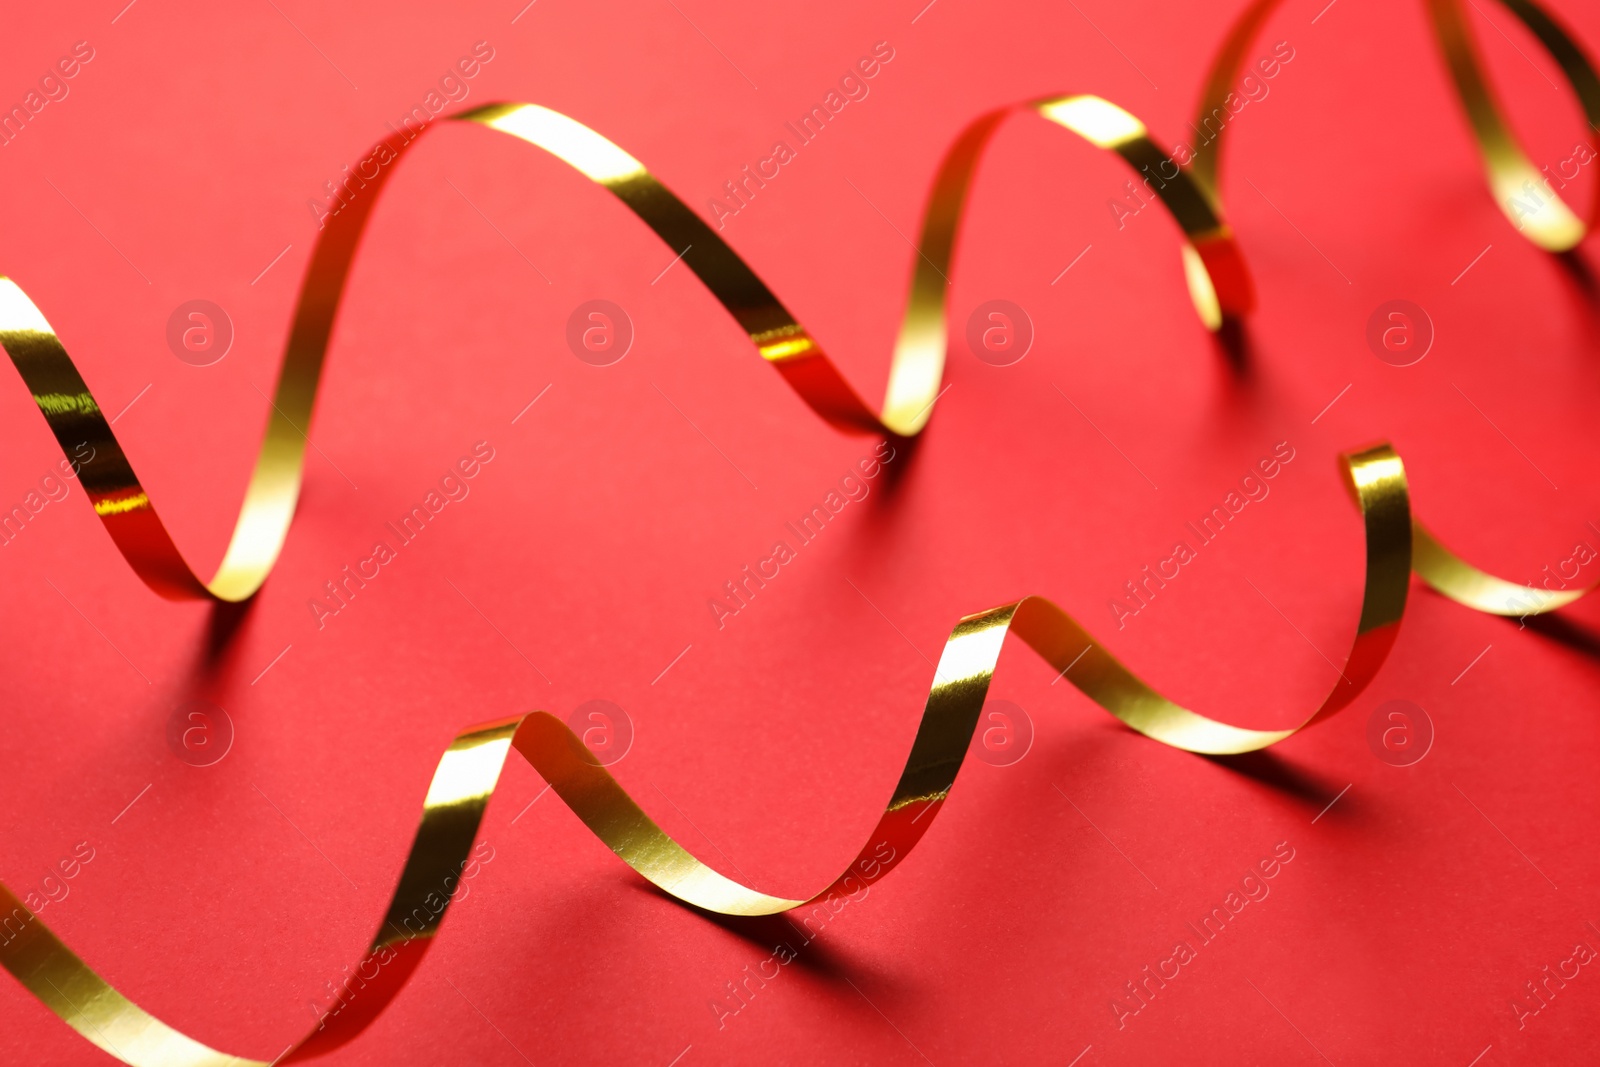 Photo of Shiny golden serpentine streamers on red background, closeup